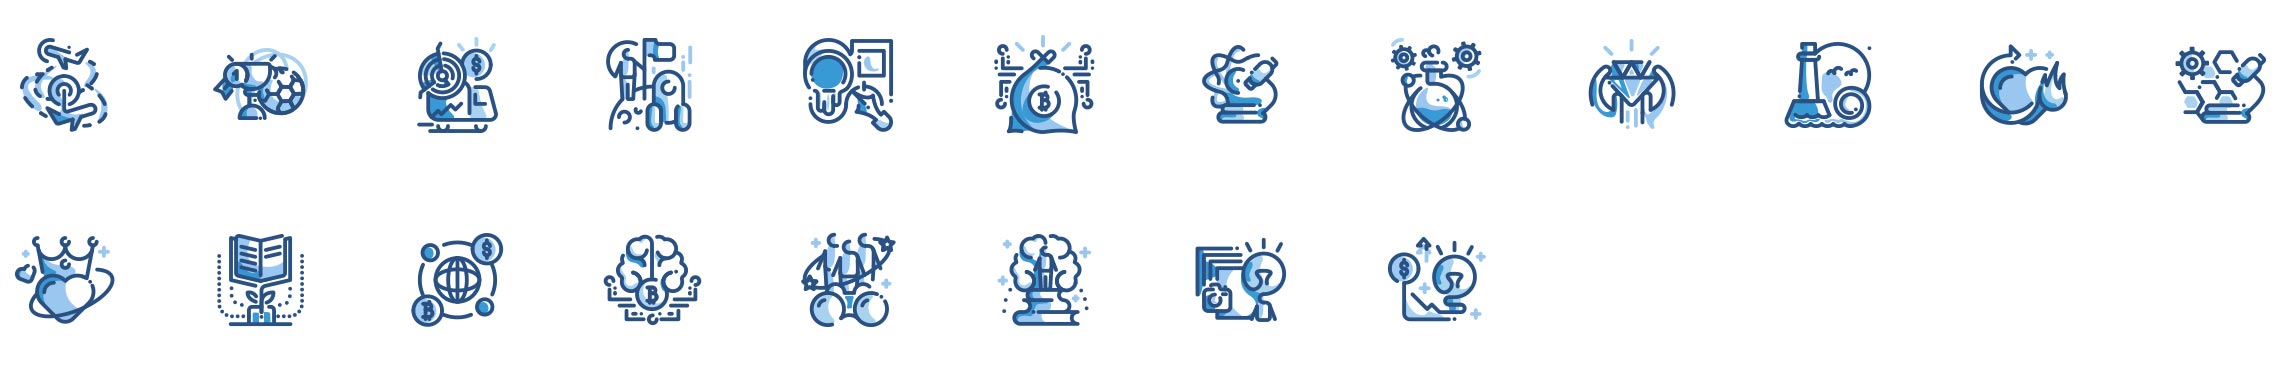 mixed-icons-set-preview